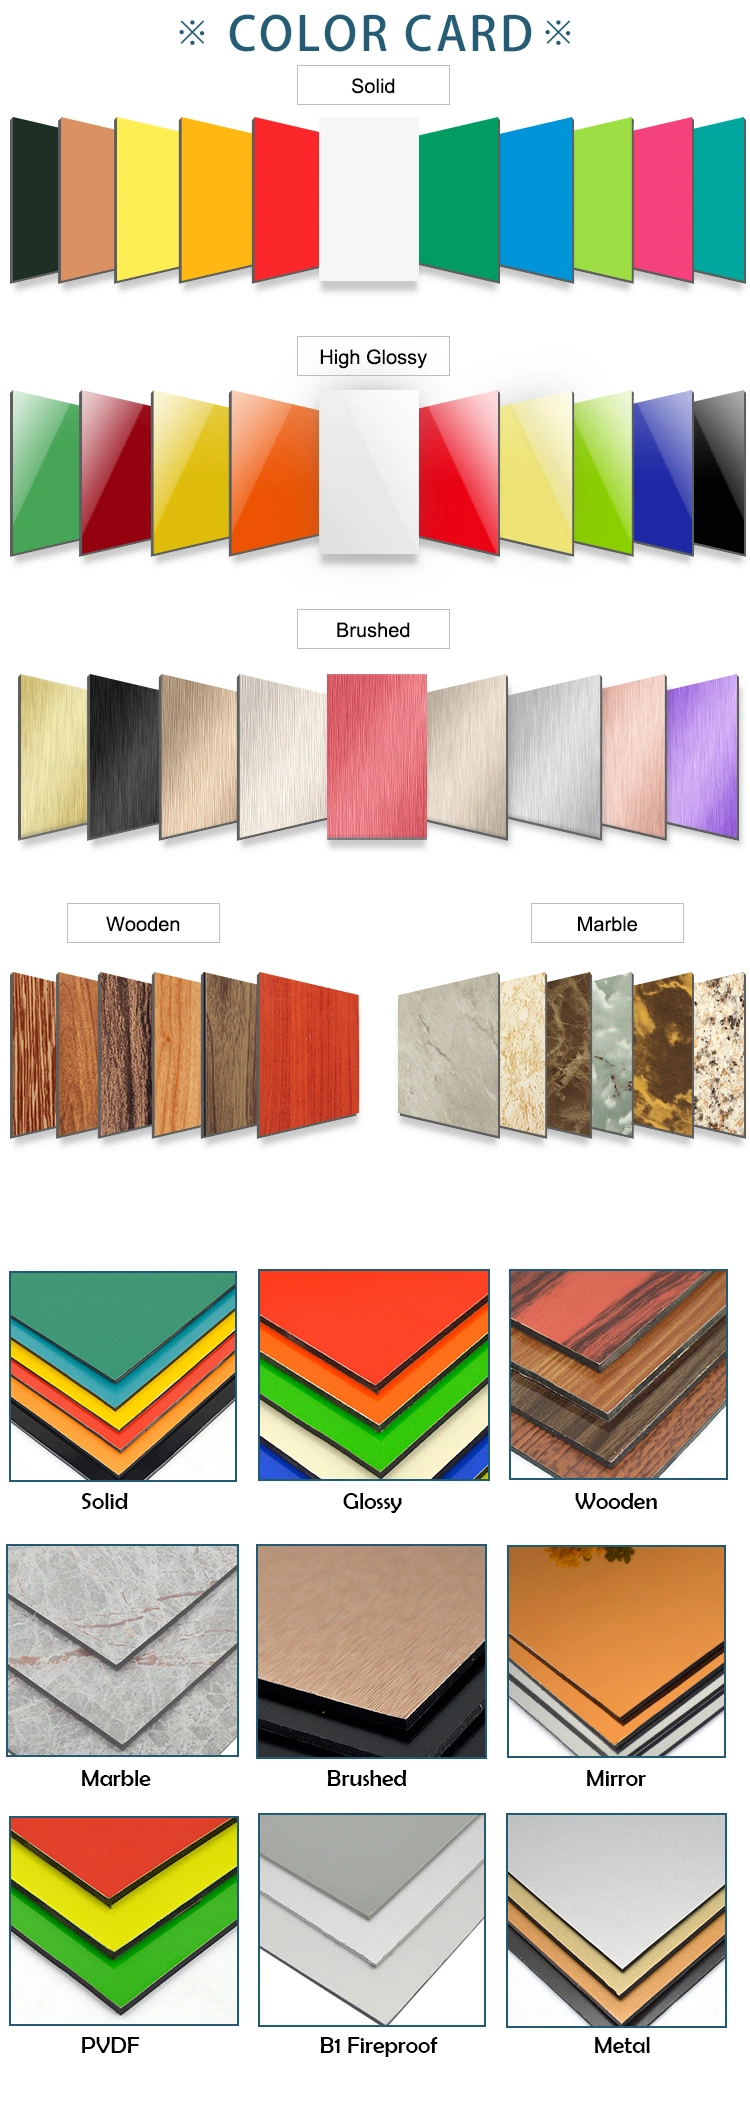 Outdoor ACP Wall Cladding at Best Price in Design Media &amp; Eventsoutdoor ACP Wall Cladding